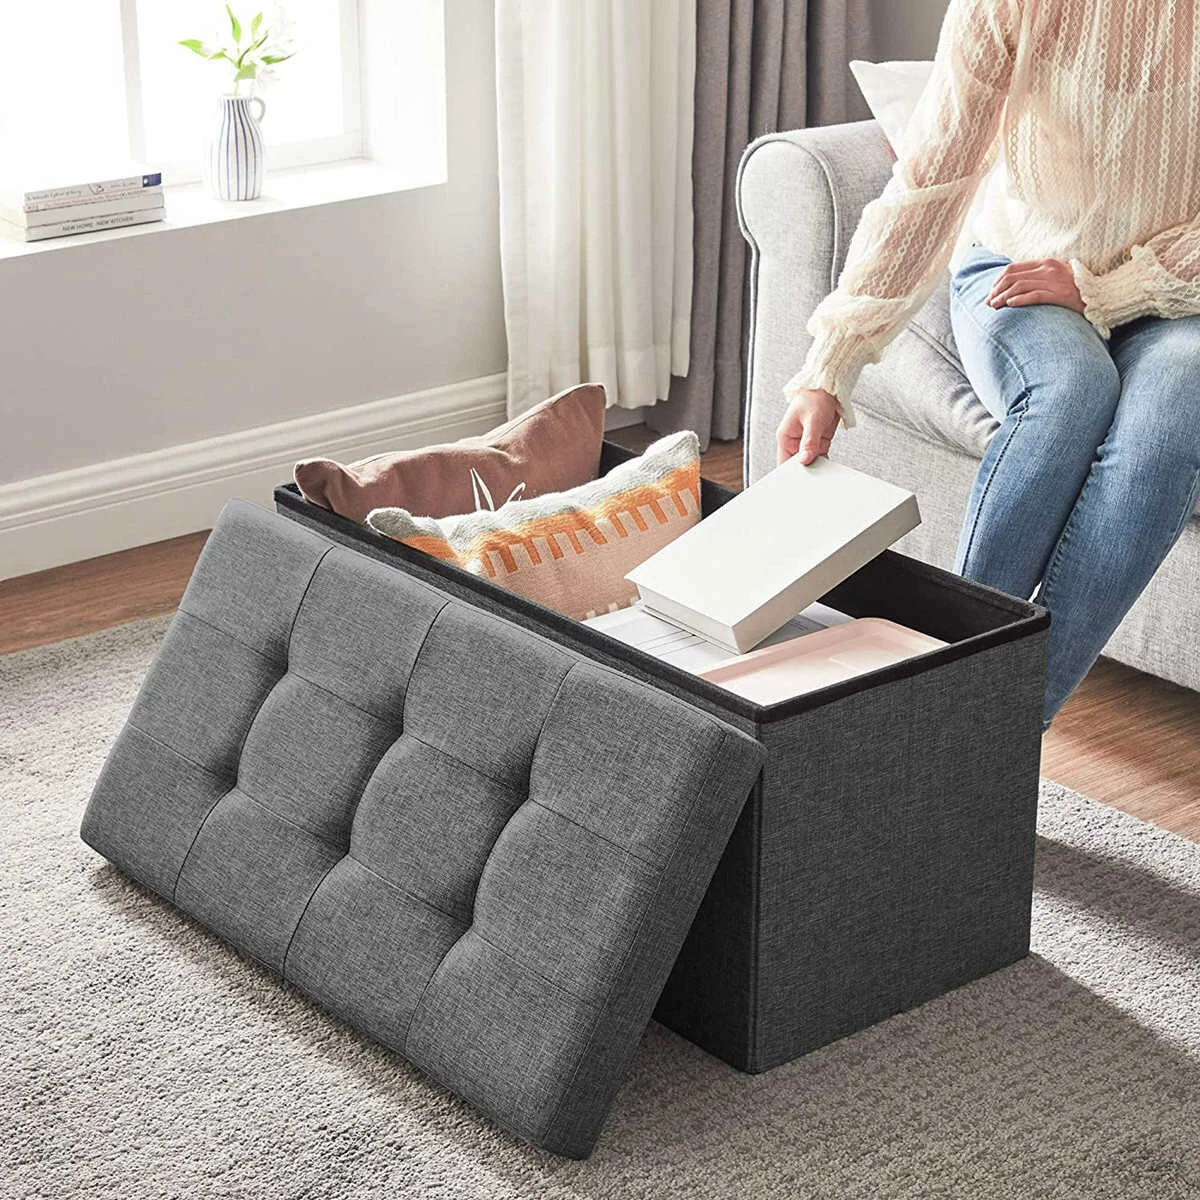 Sofa Chair Storage Box 2-in-1 Stool Multifunctional Folding Sofa Ottoman Footrest Footstool Square Chair for Home Office - Grey M